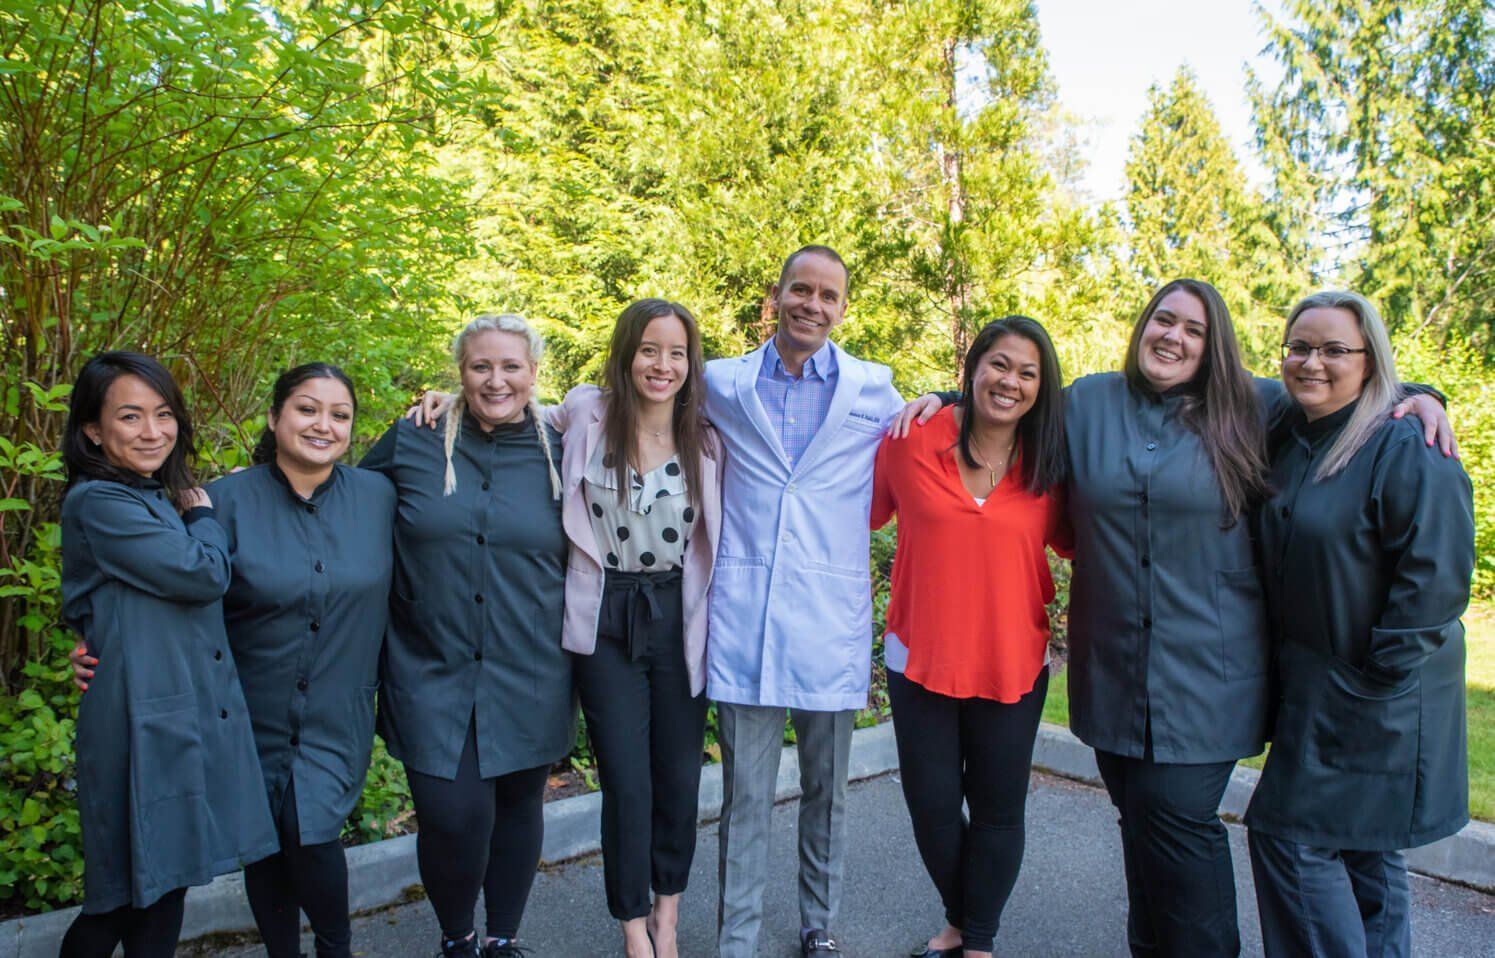 Our dedicated team at our Bellevue dental office smiling for group a picture.